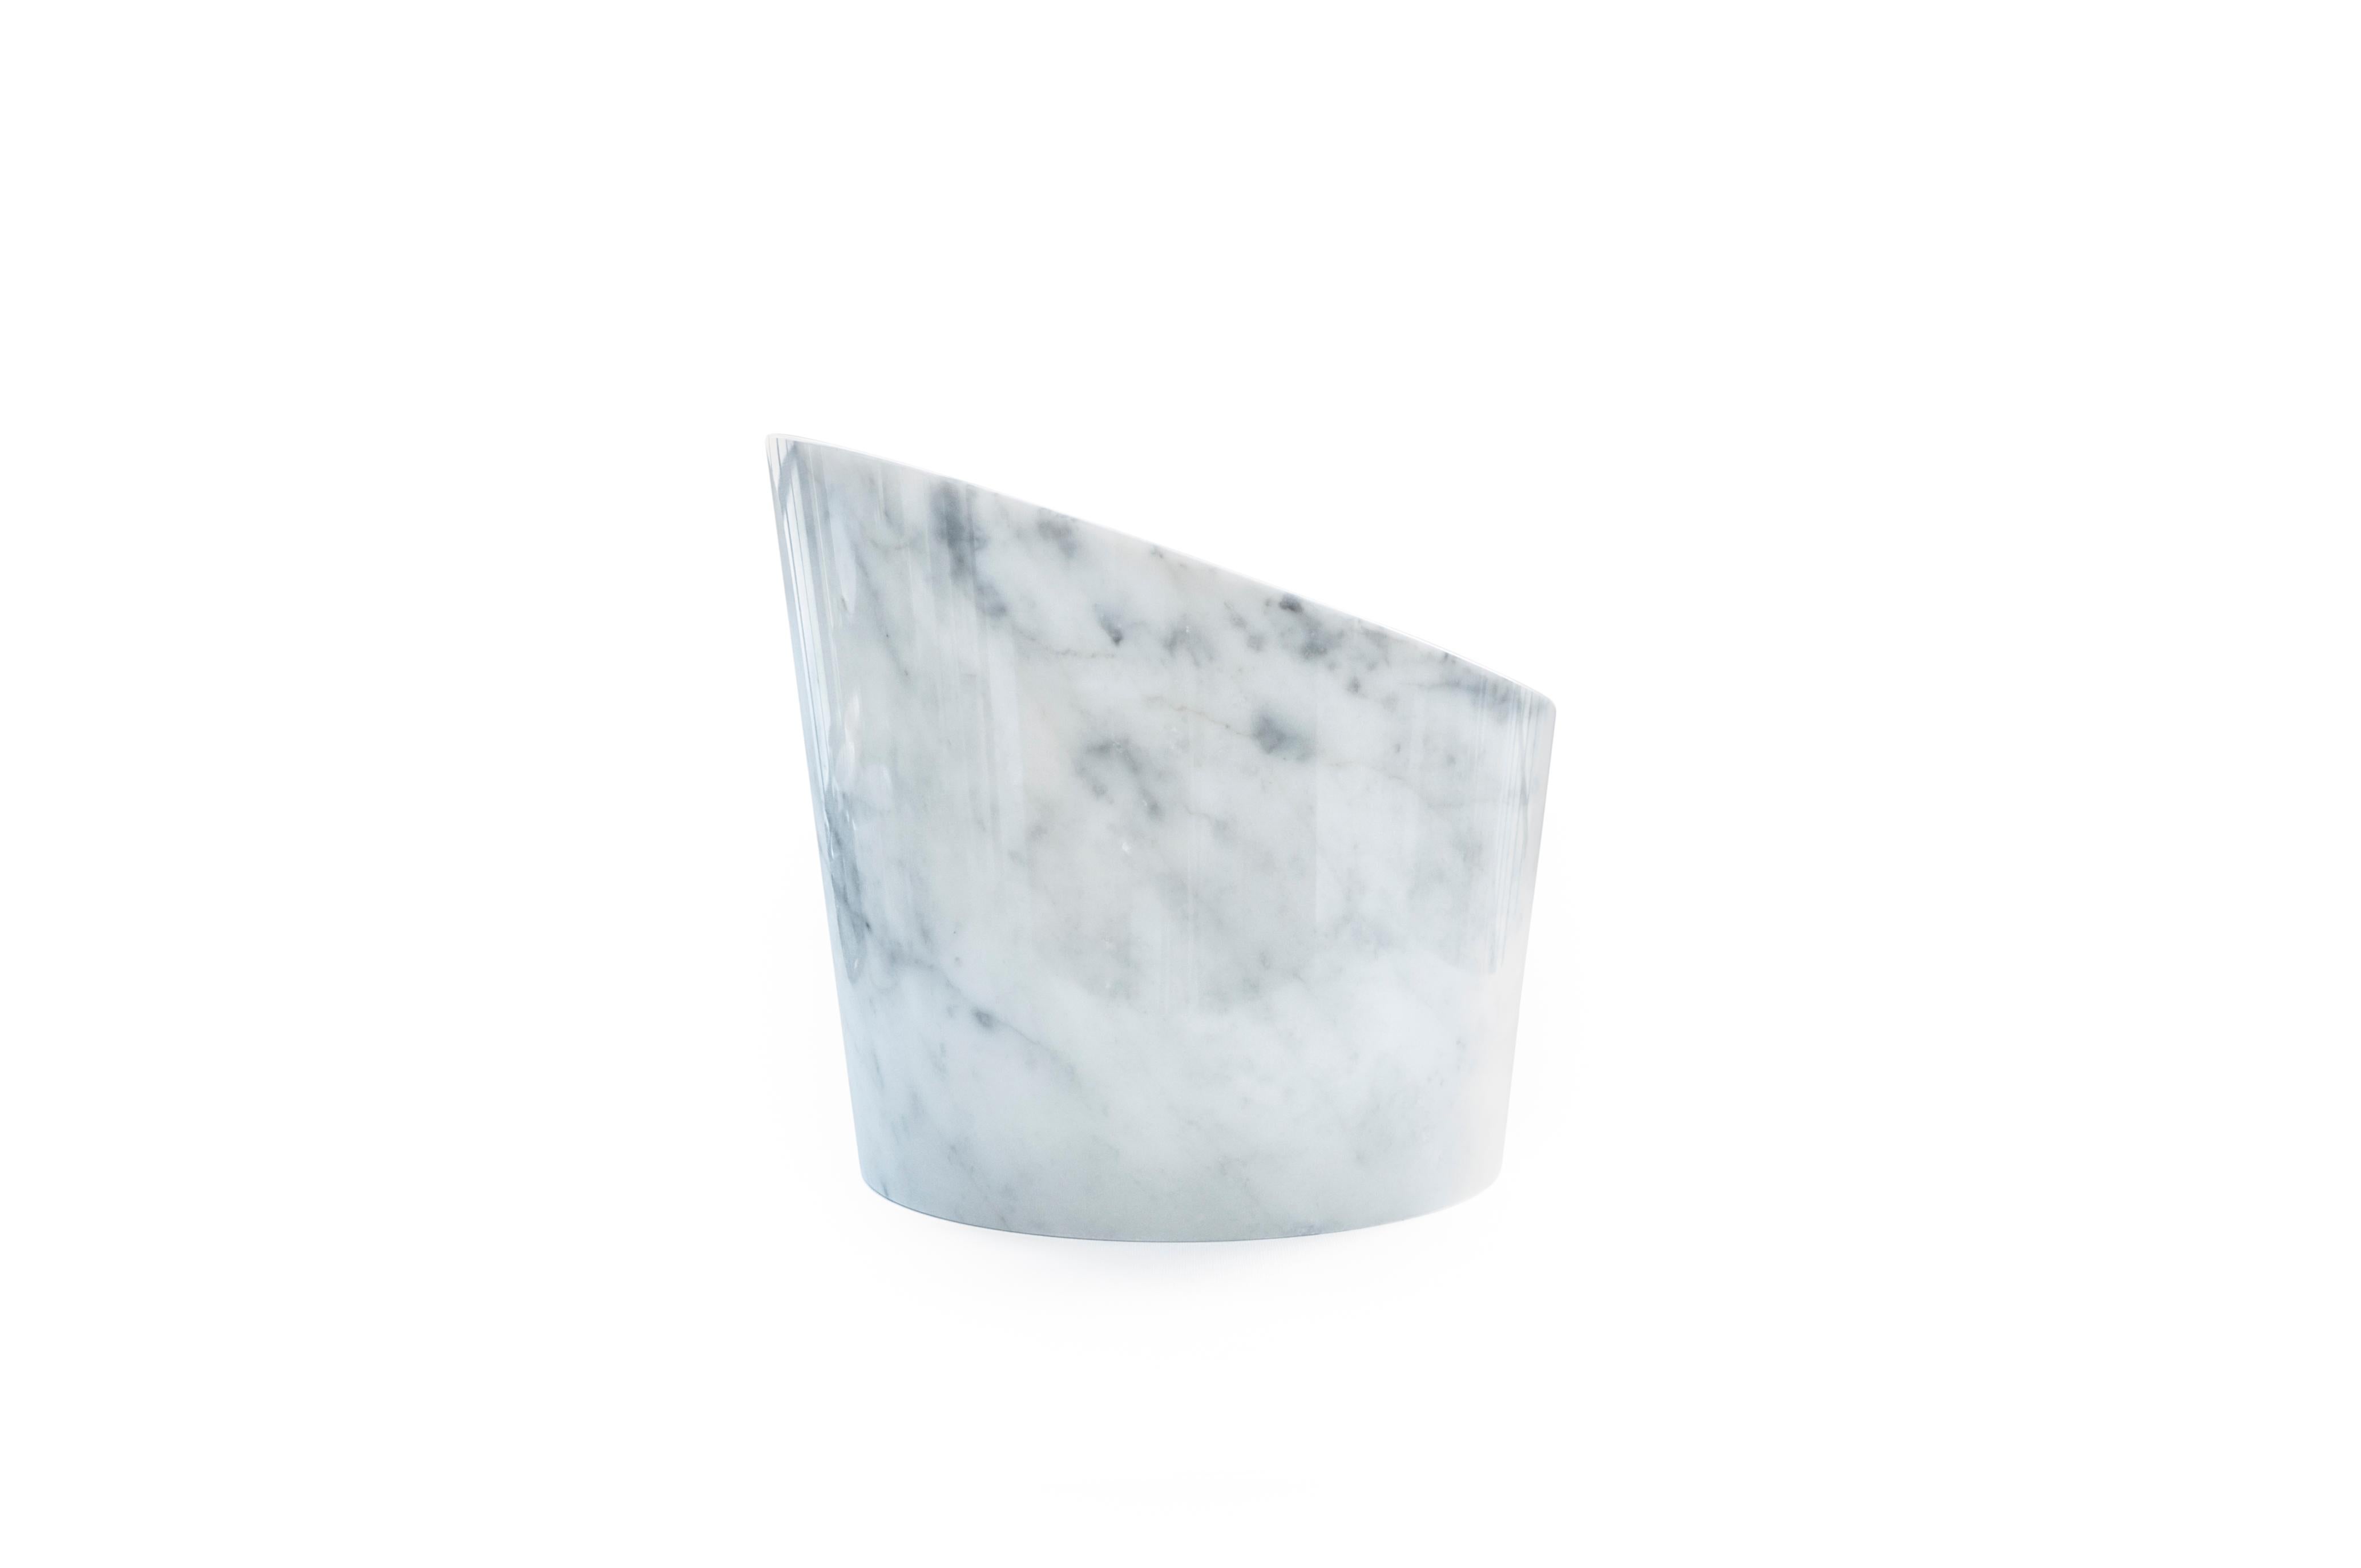 Big white Carrara marble glacette for 4 wine and champagne bottles. Each piece is in a way unique (since each marble block is different in veins and shades) and handcrafted in Italy. Slight variations in shape, color and size are to be considered a